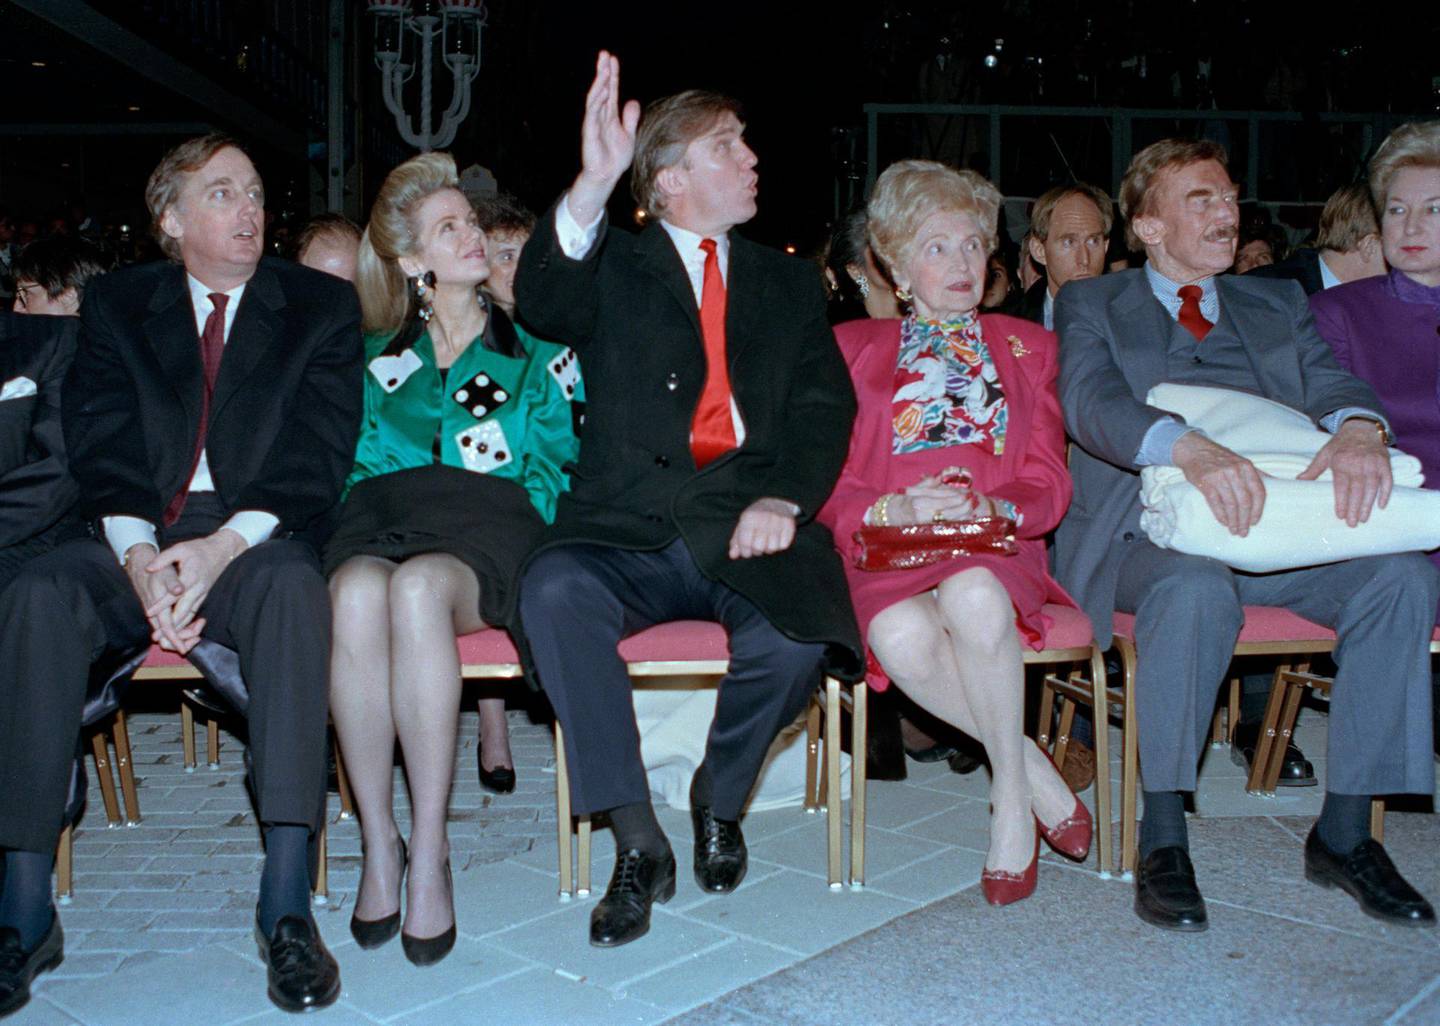 Donald Trump in the '90s with his family. Left to right: his brother the late Robert Trump, his former sister-in-law Blaine, Donald Trump, his parents Mary and Fred, and his sister, Maryanne Trump Barry, a retired US federal judge. AP